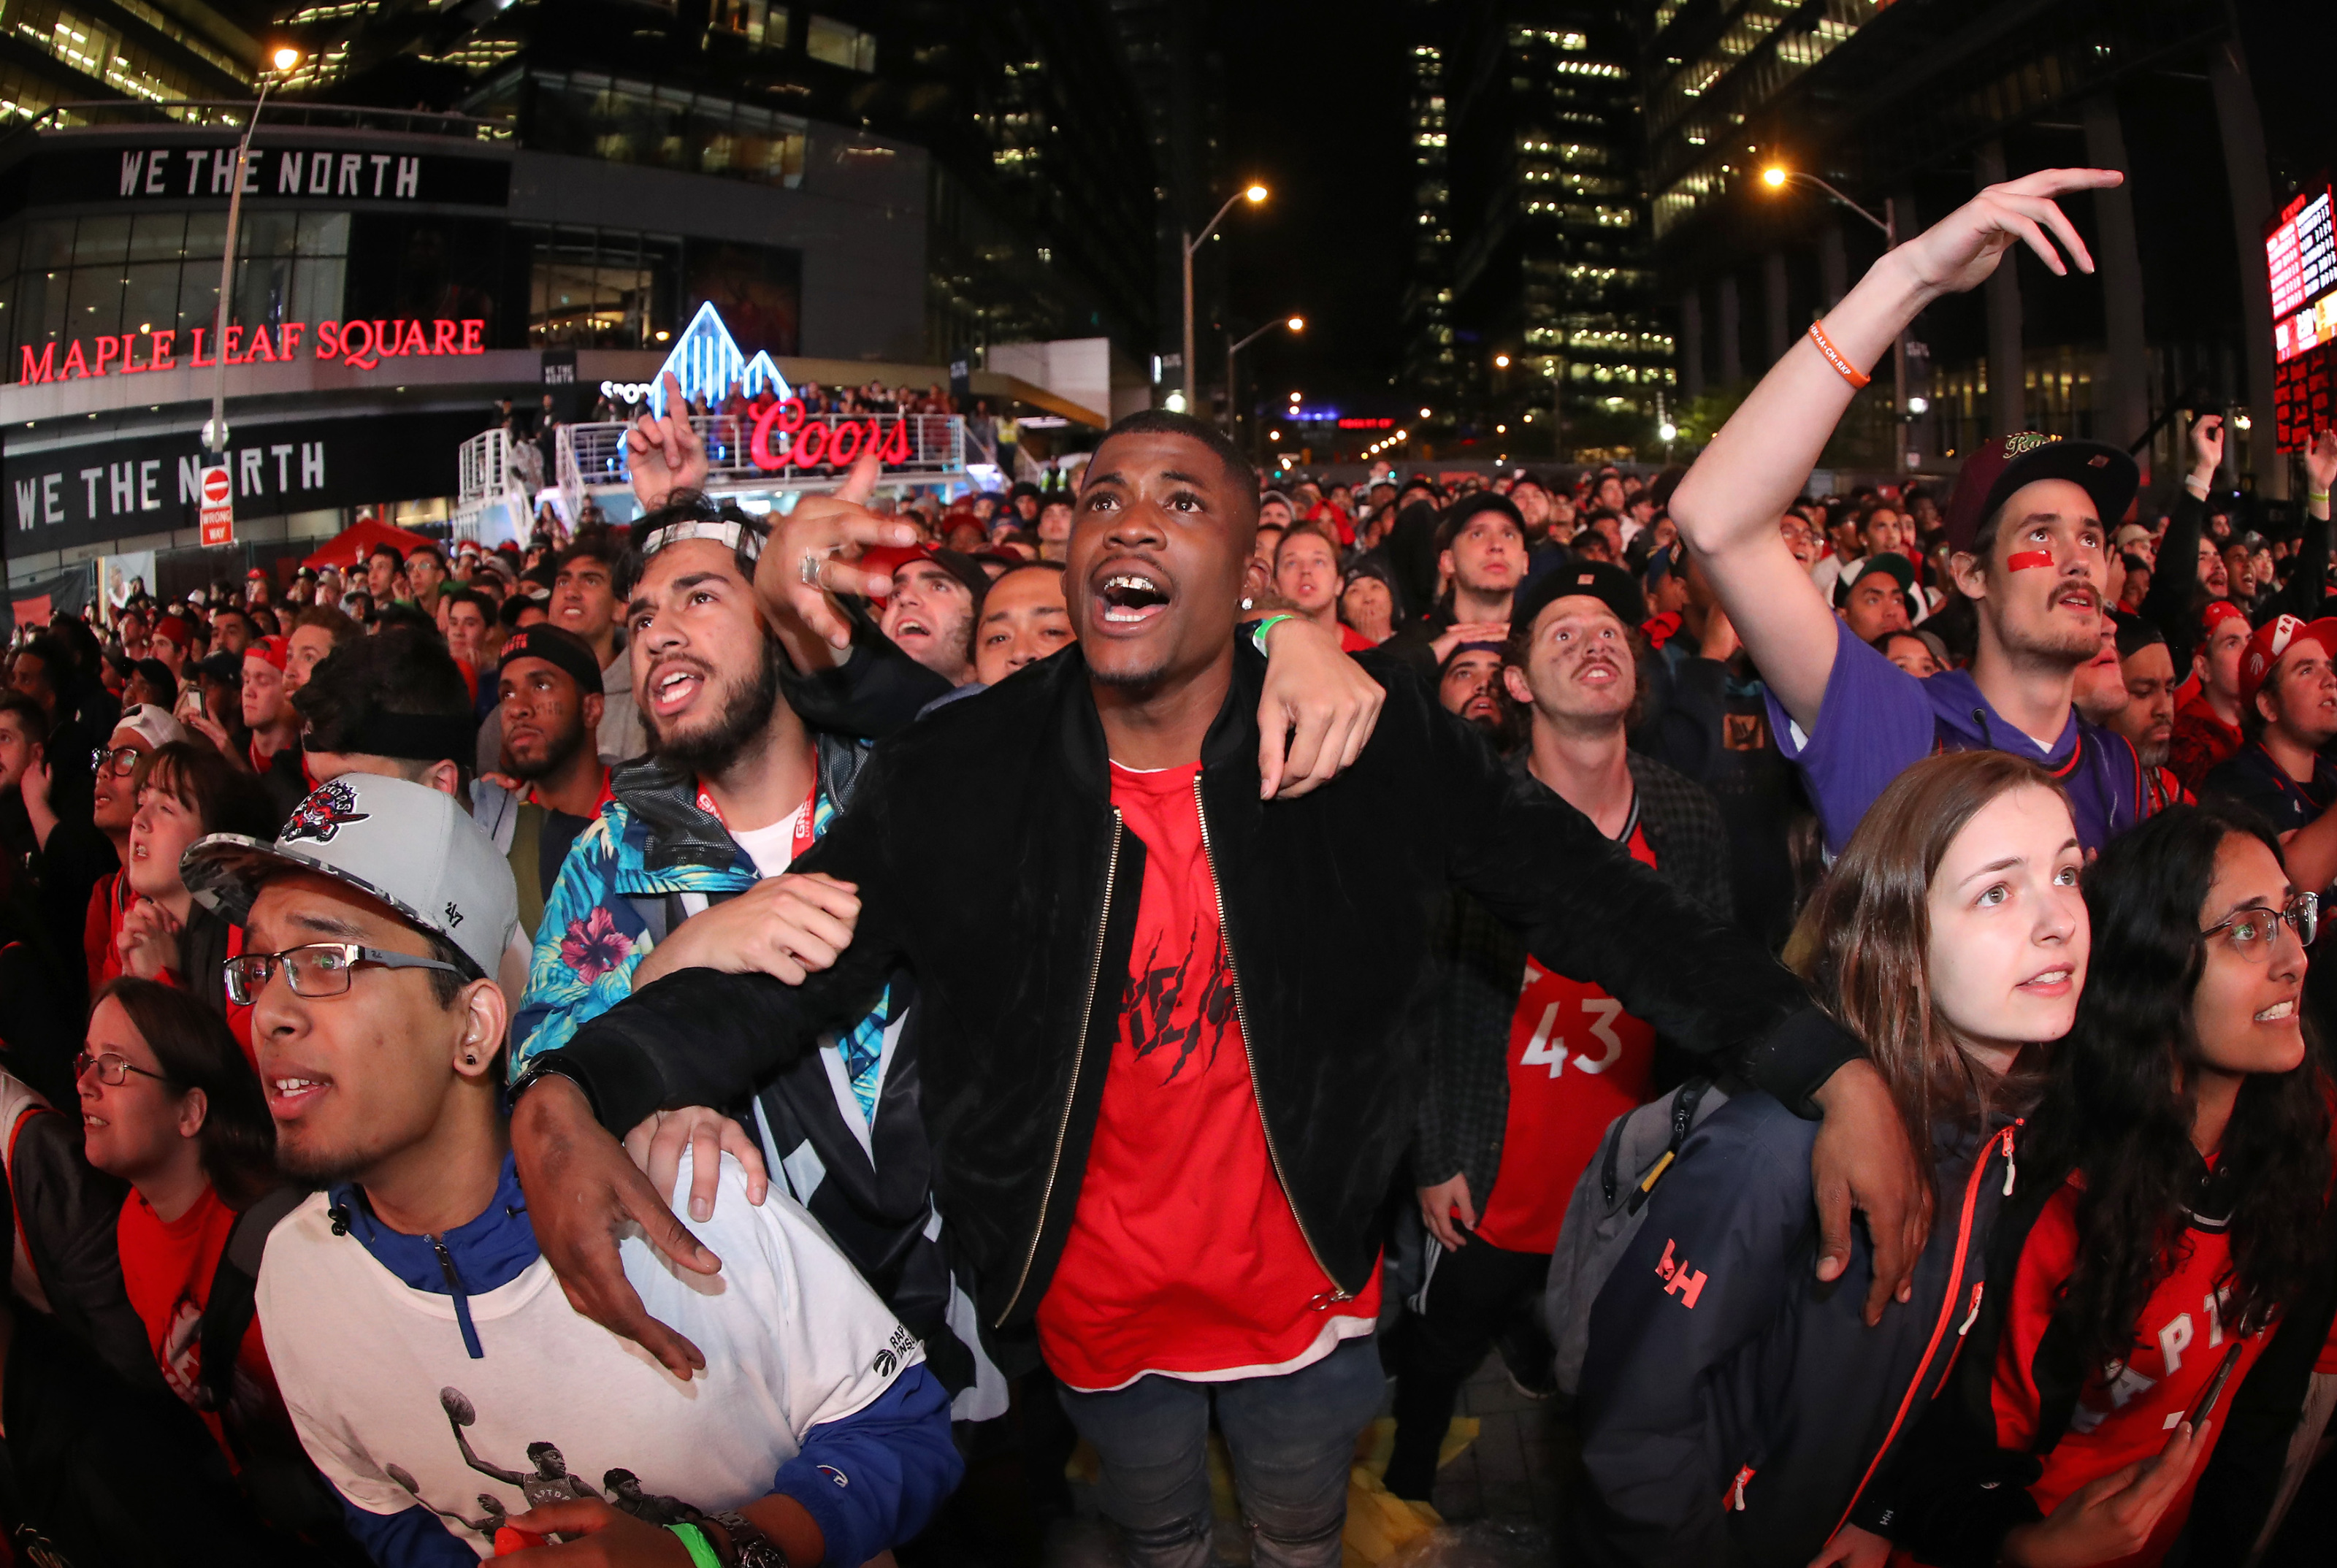 MLSE plans for return to full capacity at Scotiabank Arena for